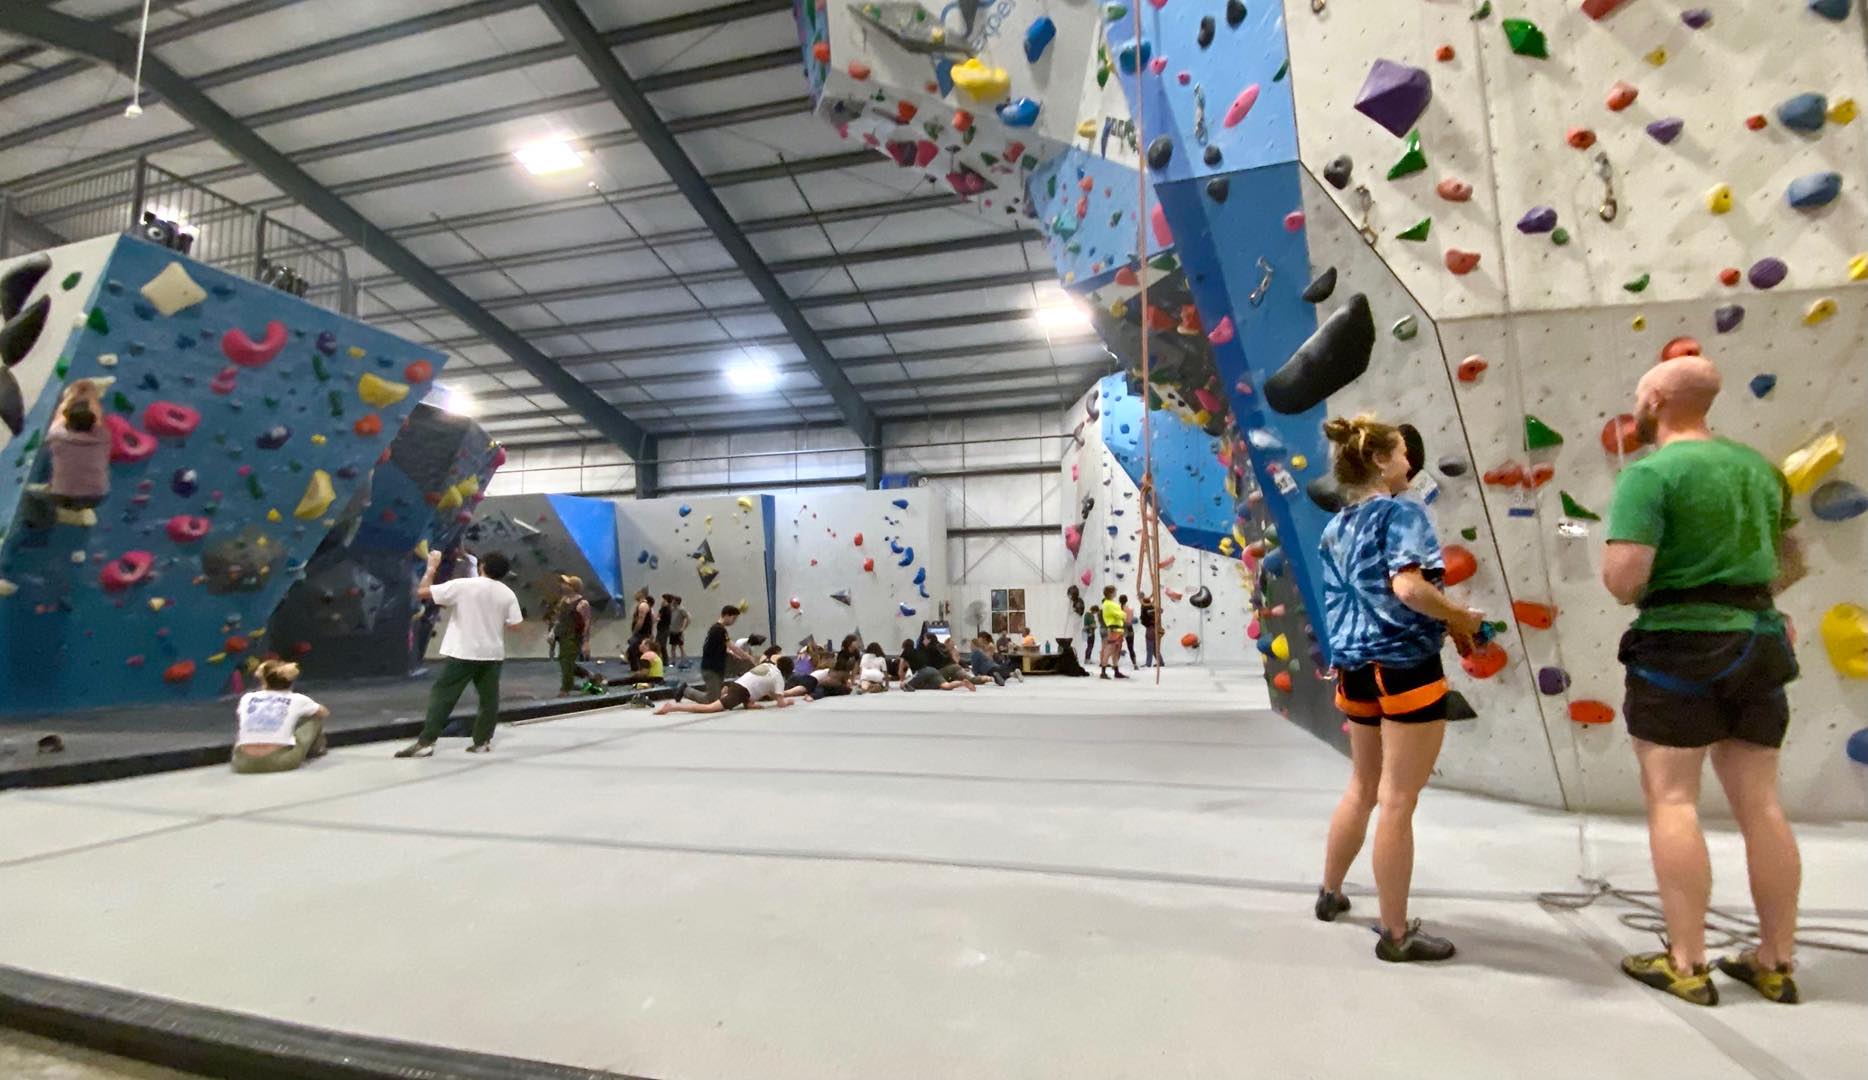 Our frequently visited, and frequently busy, local indoor climbing gym. Look at those overhangs!